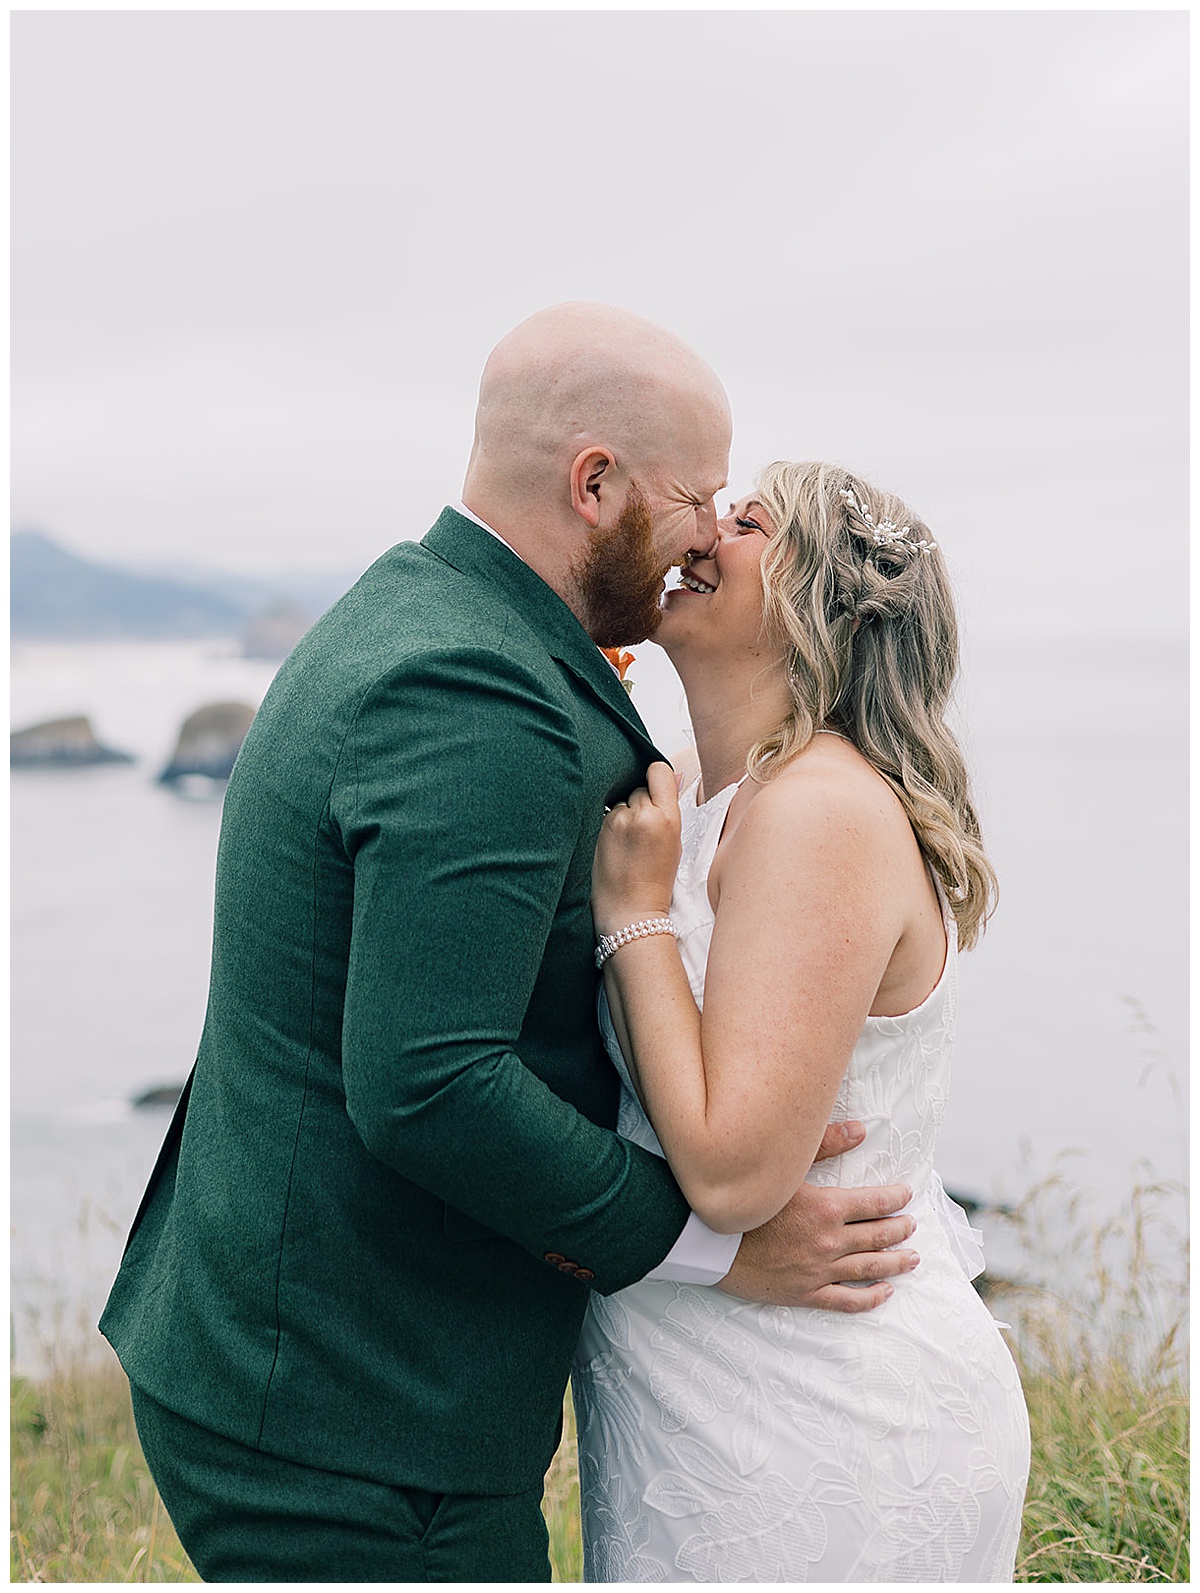 Man and woman share a kiss for Cannon Beach, Oregon, wedding